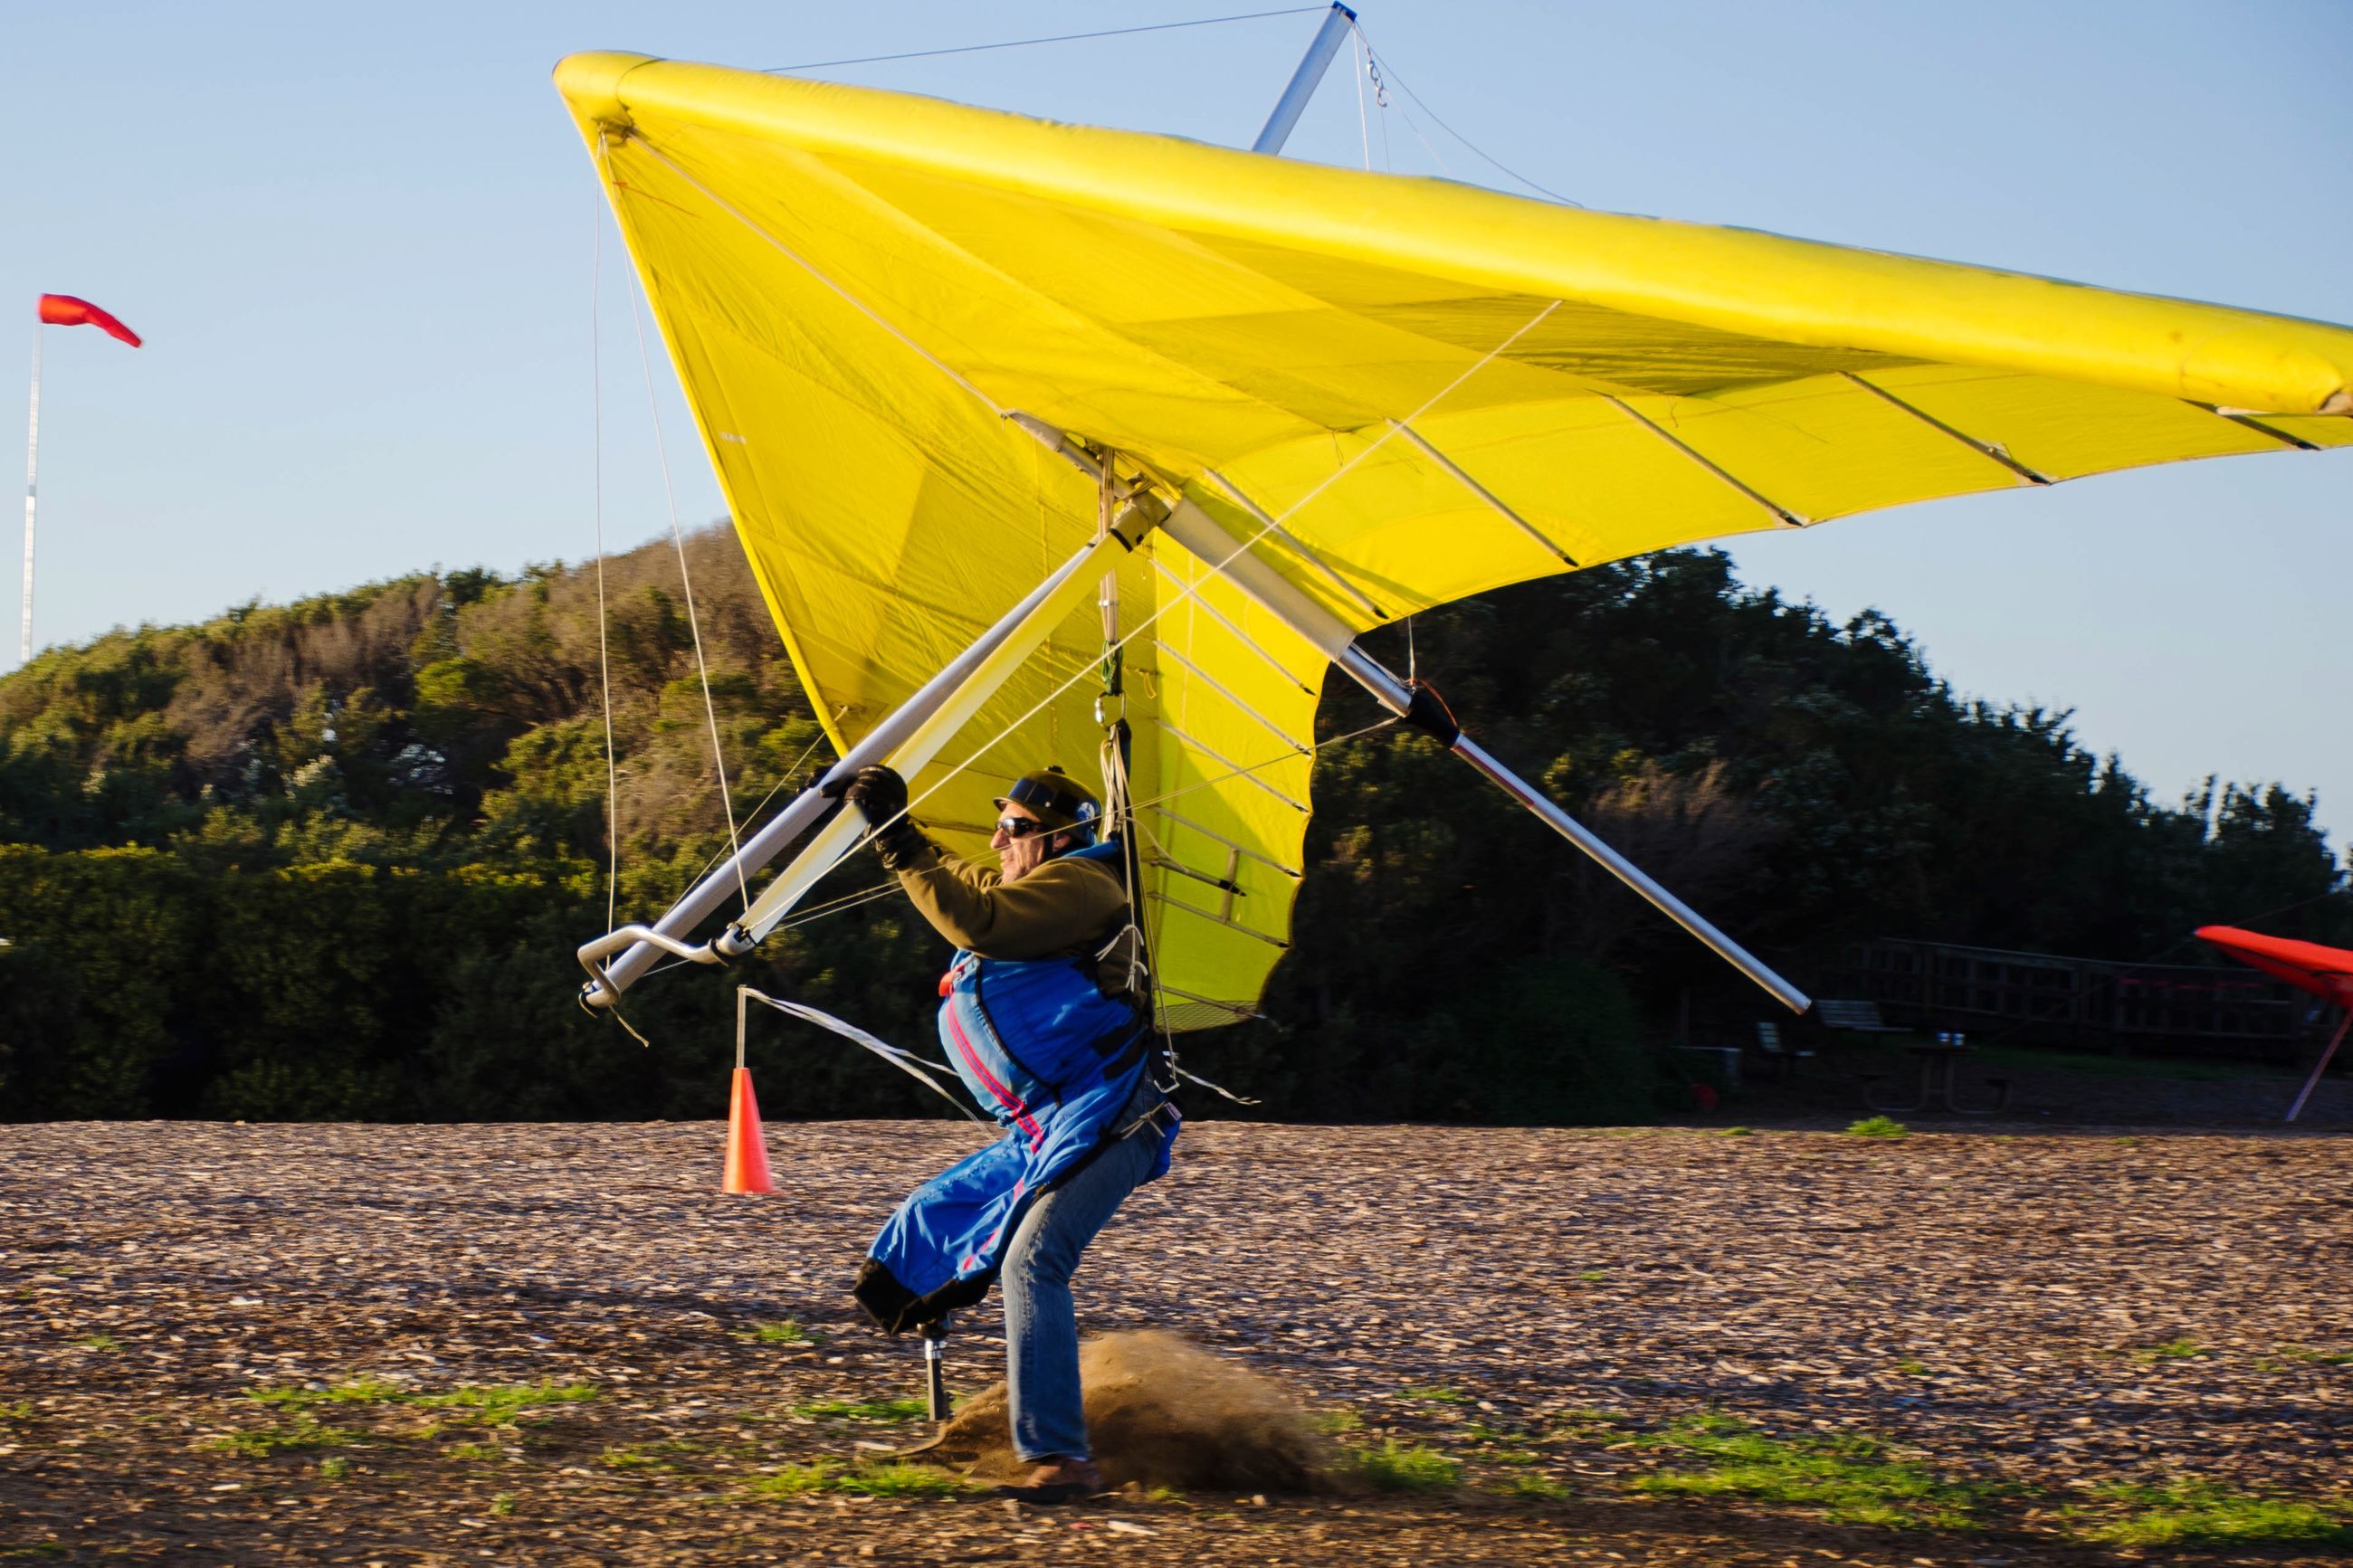 leisure activity, lifestyles, clear sky, full length, yellow, sky, umbrella, casual clothing, childhood, fun, transportation, landscape, day, field, flag, tree, blue, enjoyment